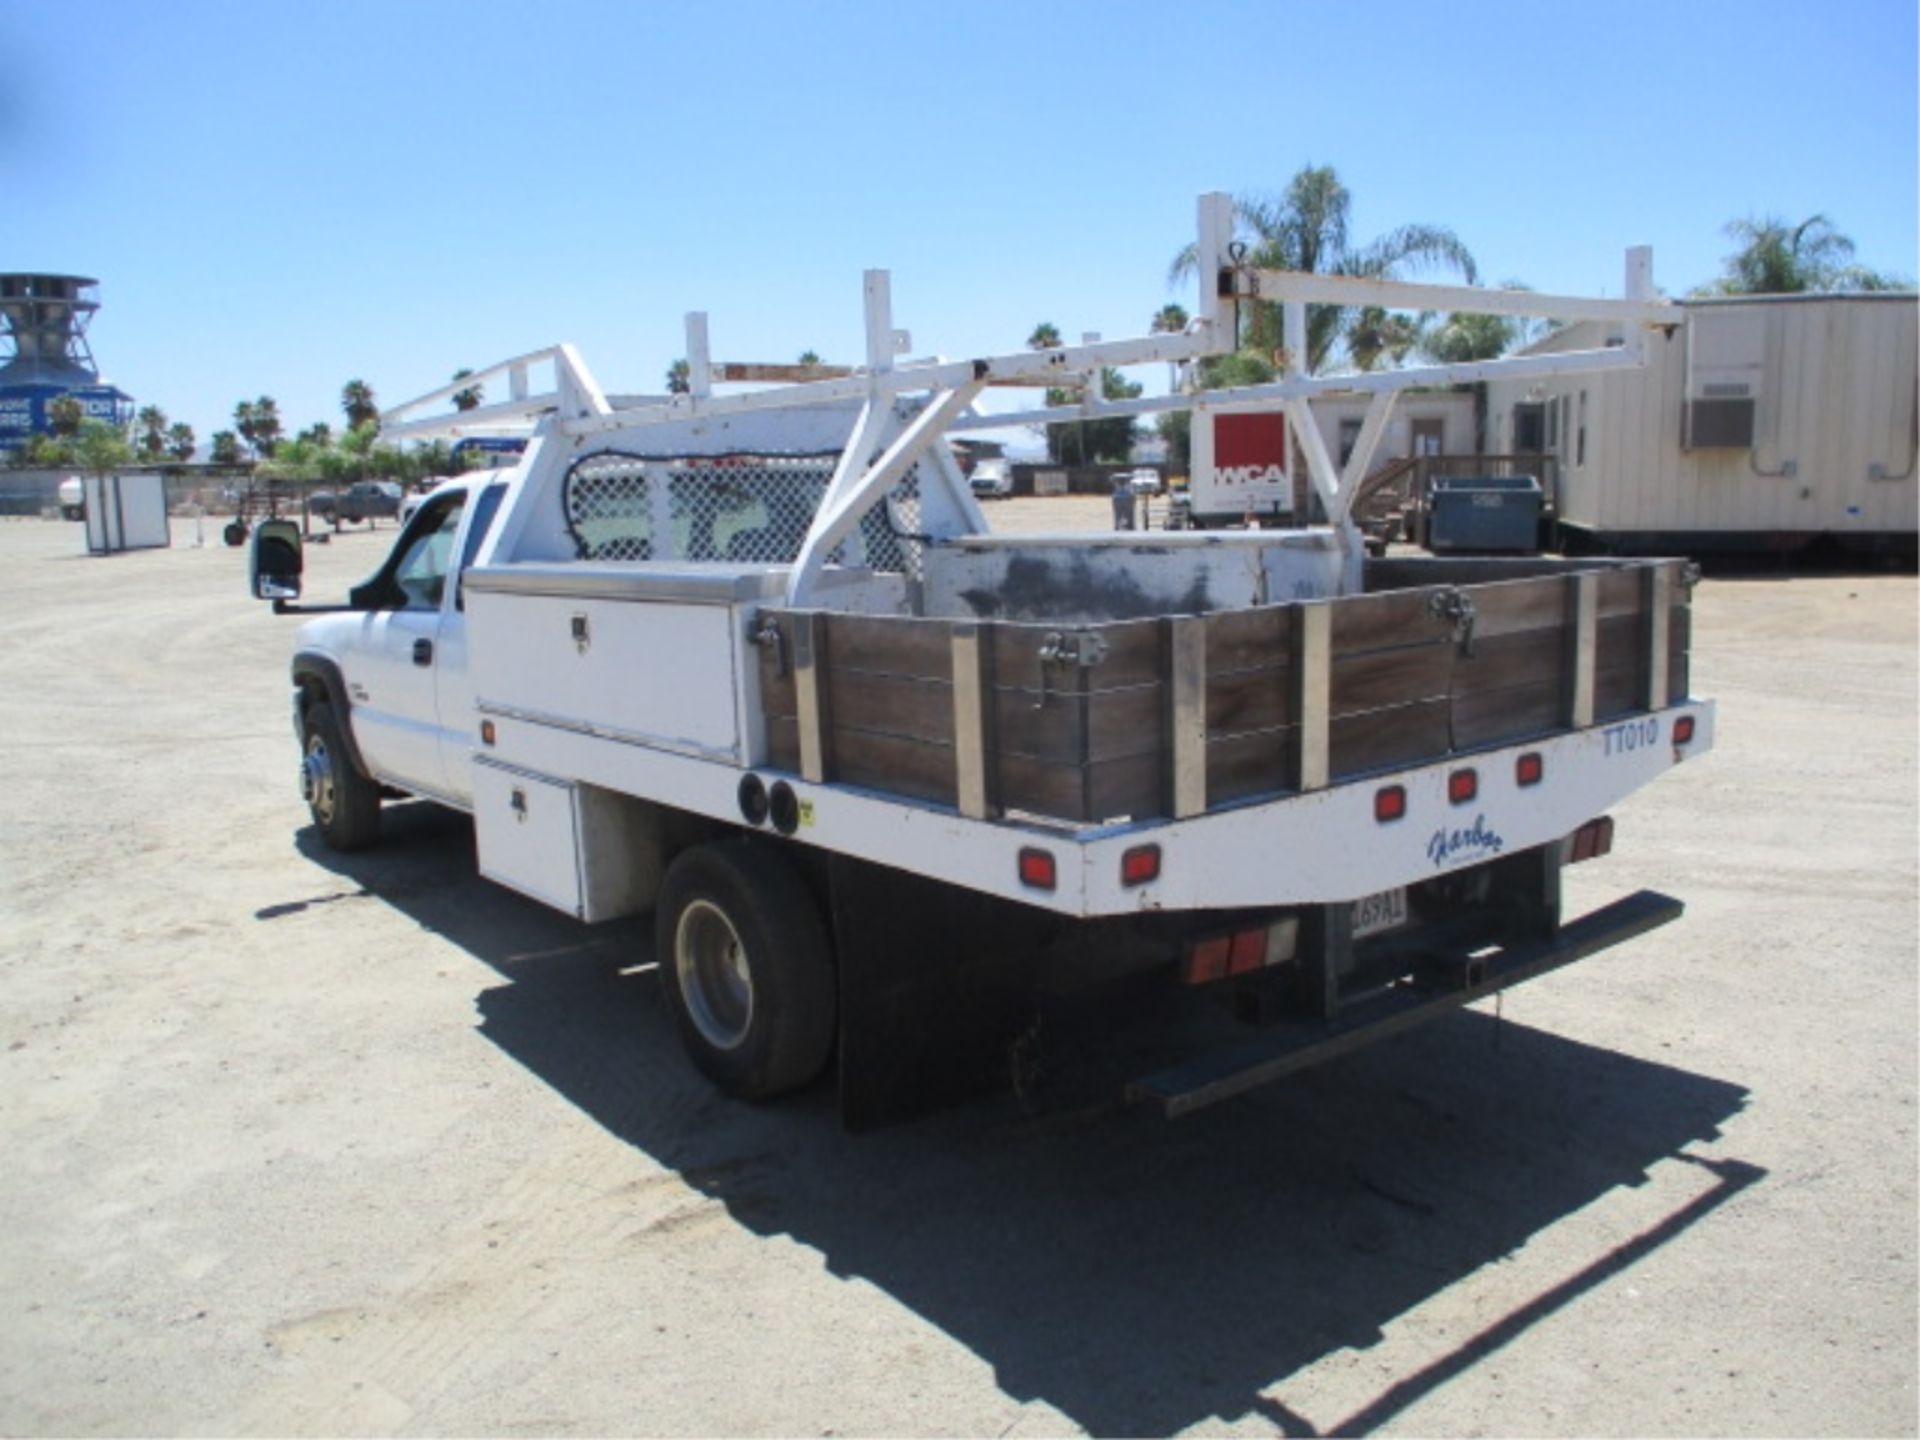 2006 Chevrolet 3500 Extended-Cab Utility Truck, 6.6L Turbo Diesel, Automatic, Tool Boxes, Lumber - Image 24 of 71